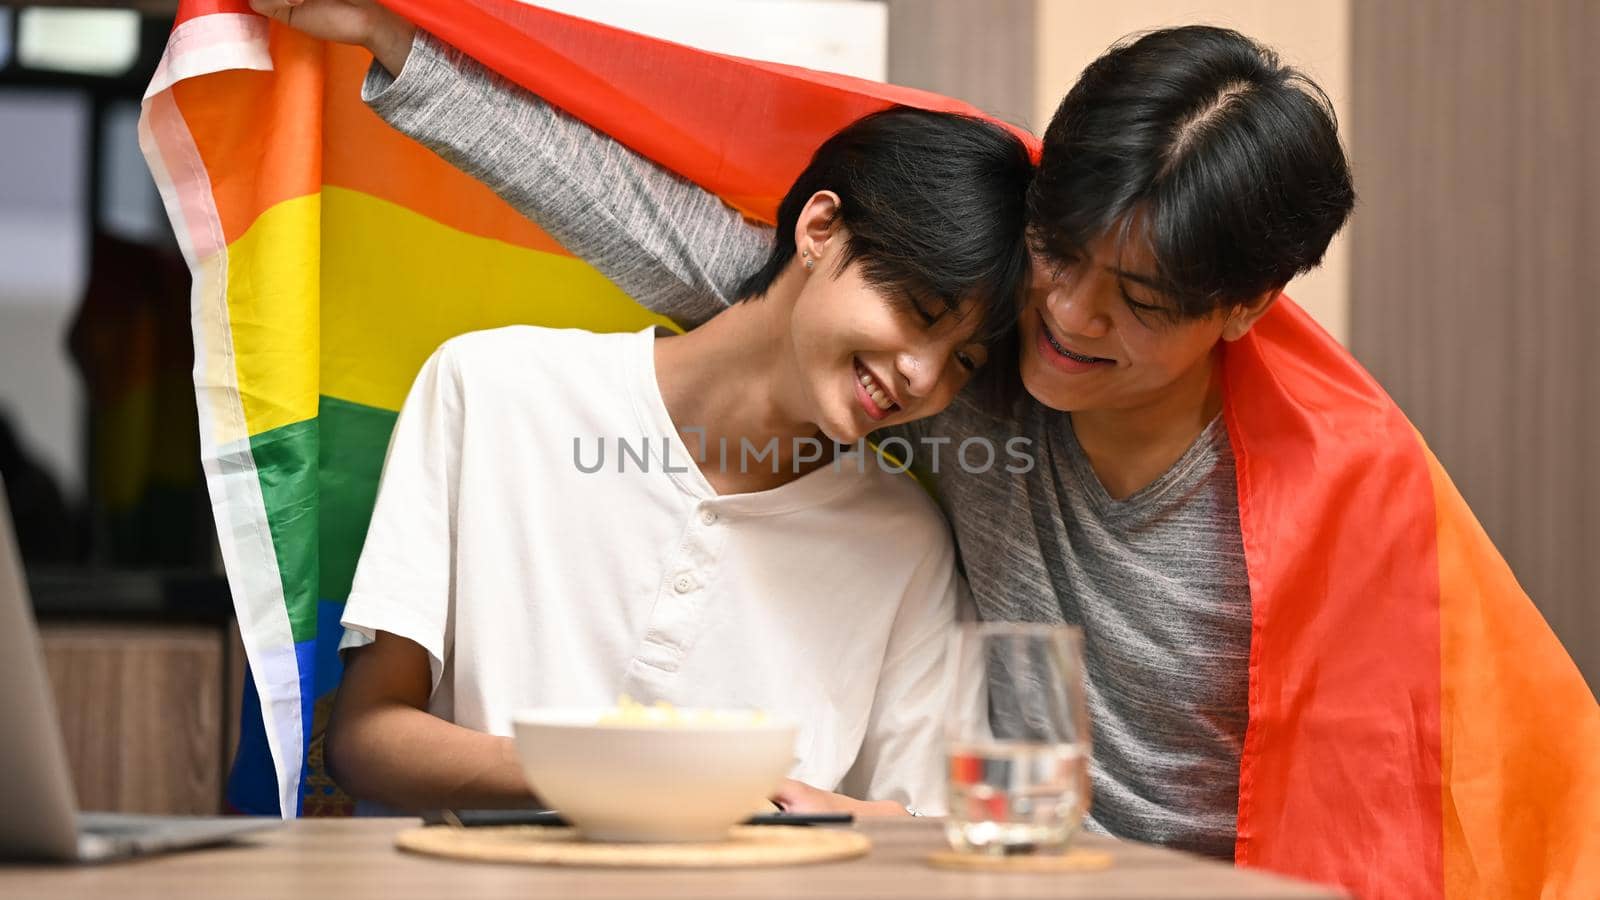 Happy young homosexual couple embracing under LGBTQ pride flag. Concept of sexual freedom and equal rights for LGBT community by prathanchorruangsak